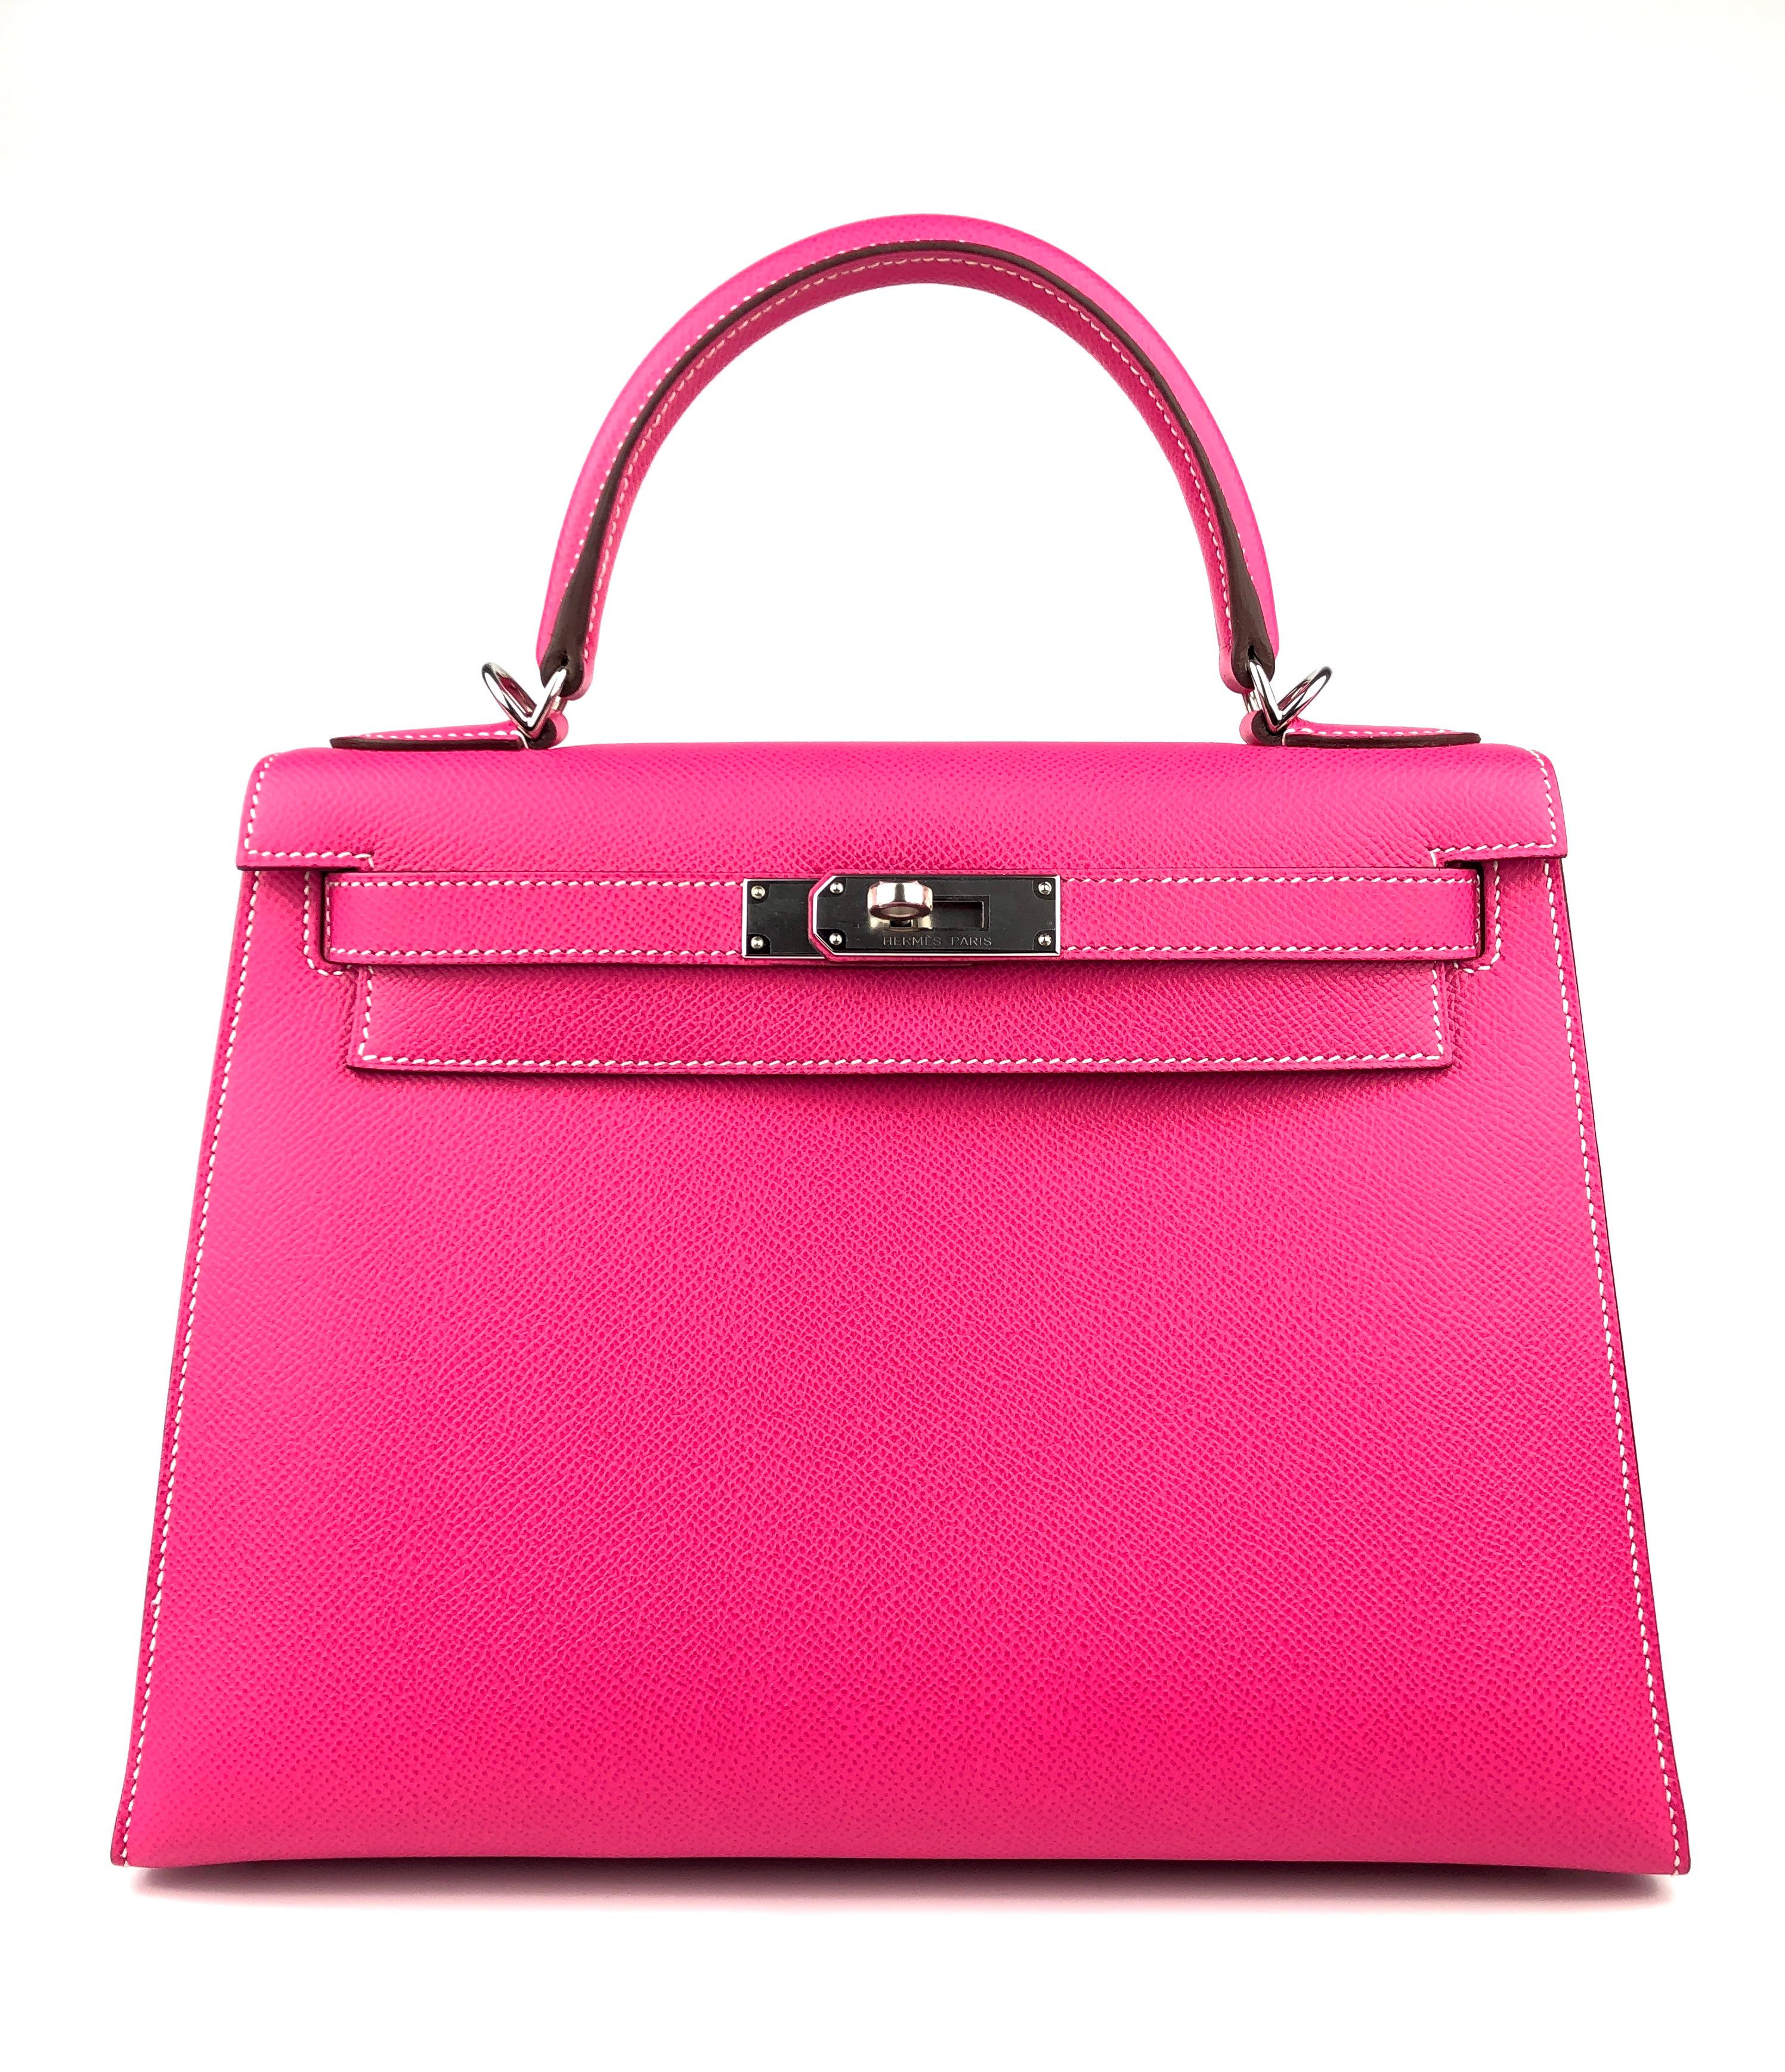 Absolutely Stunning Like New Hermes Kelly 28 Sellier Rose Tyrien Epsom Leather complimented by Palladium Hardware. Plastic on all hardware and feet. 

Shop with Confidence from Lux Addicts. Authenticity Guaranteed! 